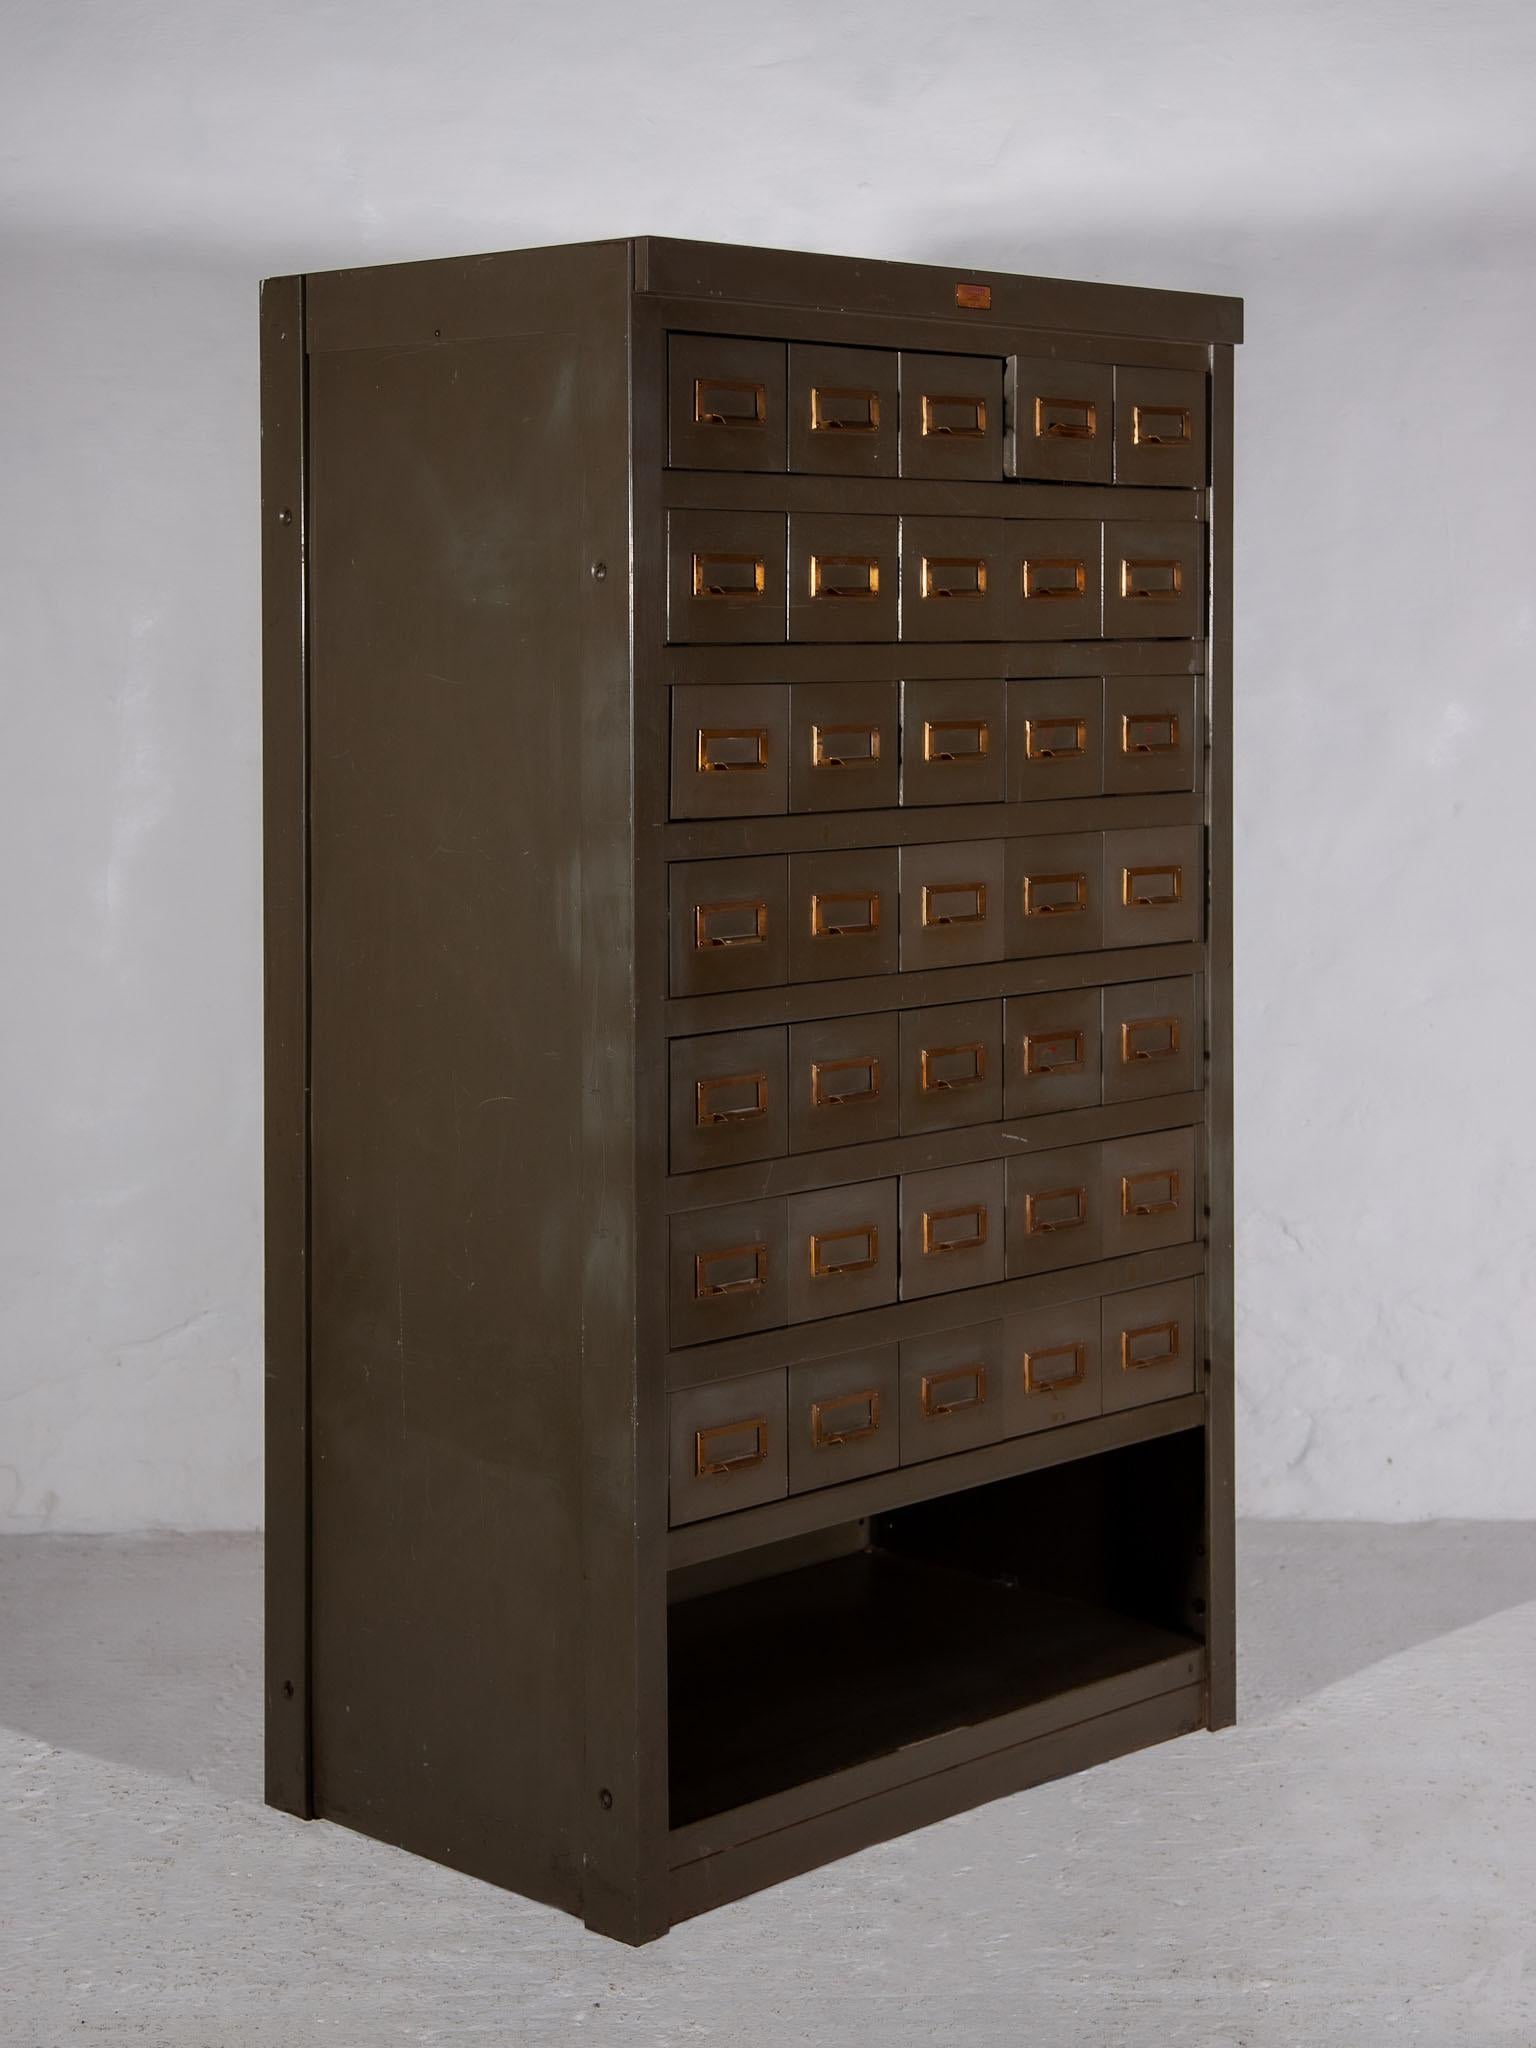 Mid-20th Century Industrial Chest of Drawers, 1940s by Acior Maison Desoer Liège, Belgium For Sale